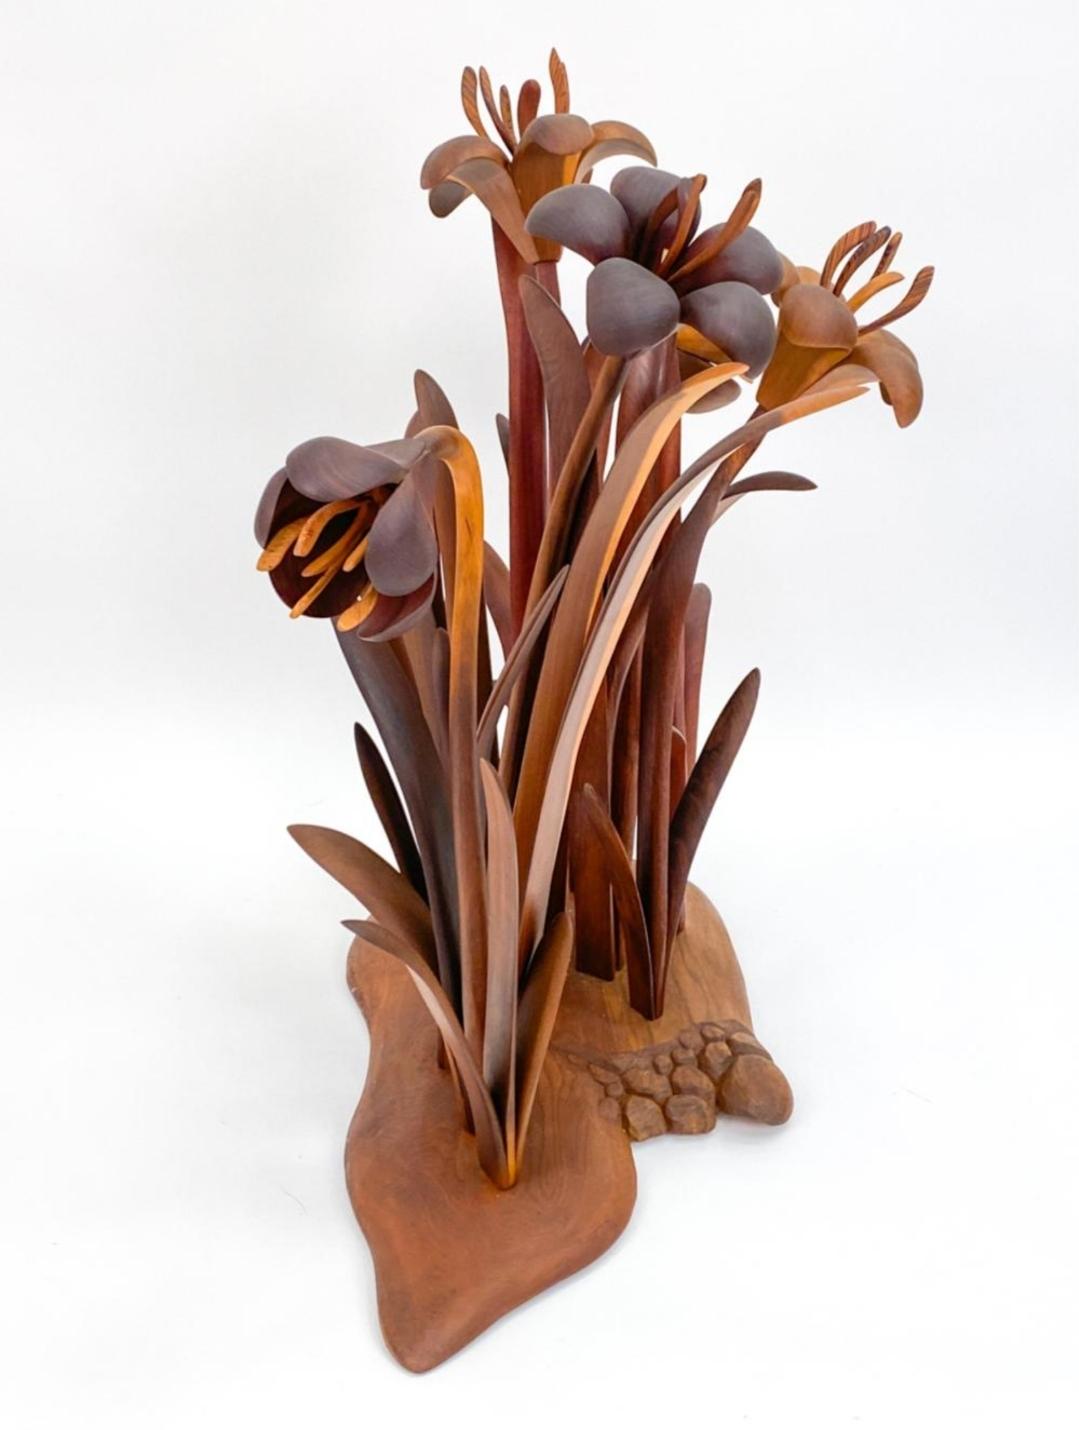 A gorgeous hand carved sculpture in walnut and cherry by the American artist team of Jeffrey and Lindley Briggs. Created in 1982 in their New England studio. This piece is made from multiple carved wood elements that had been intricately placed